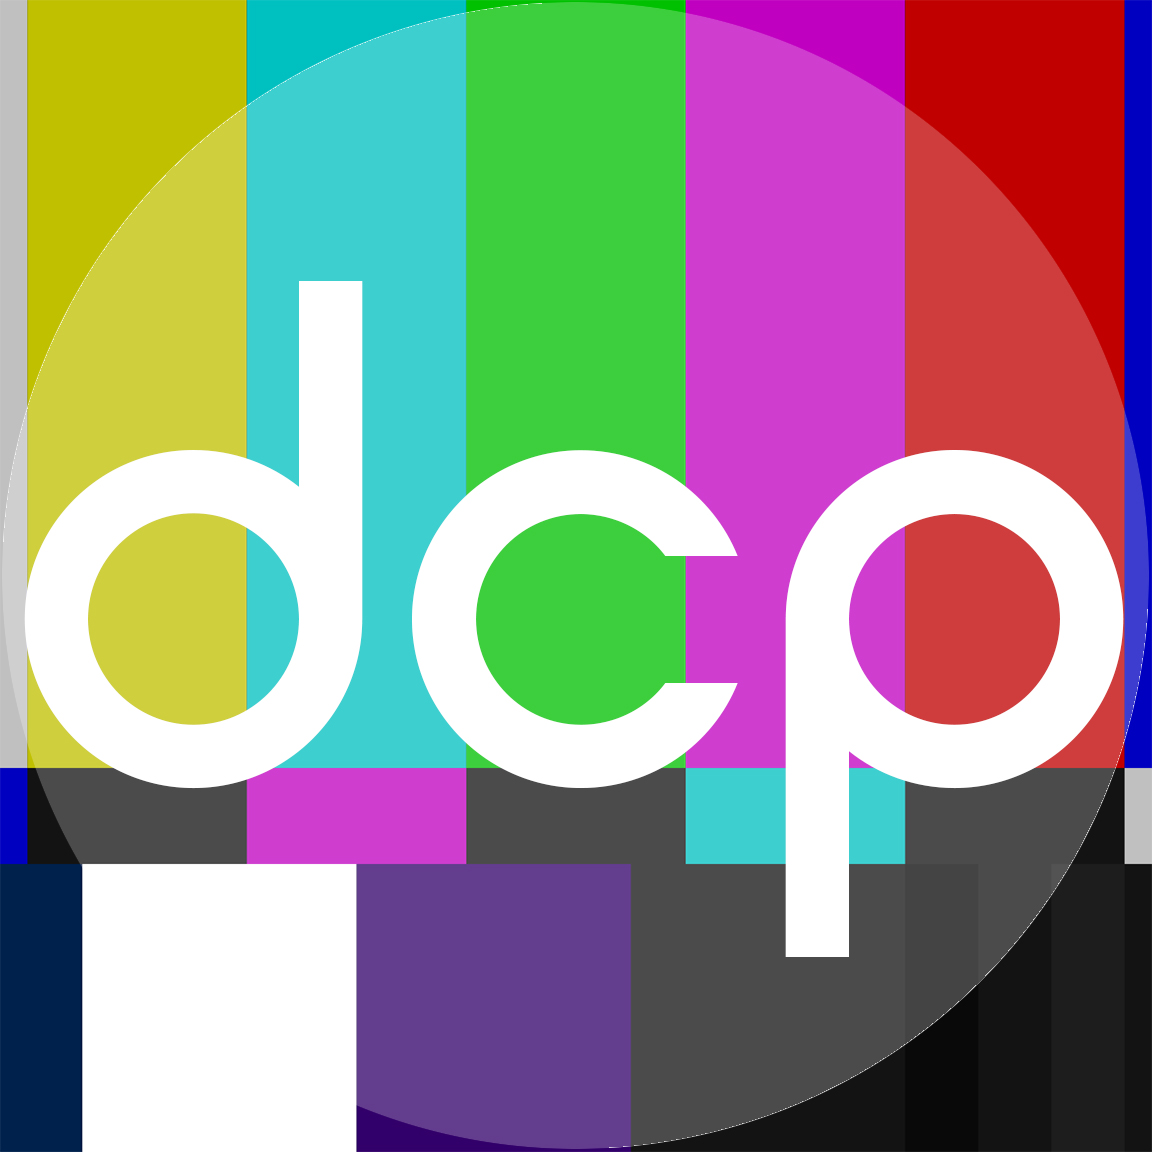 Graphic for DCP with colorbar in background